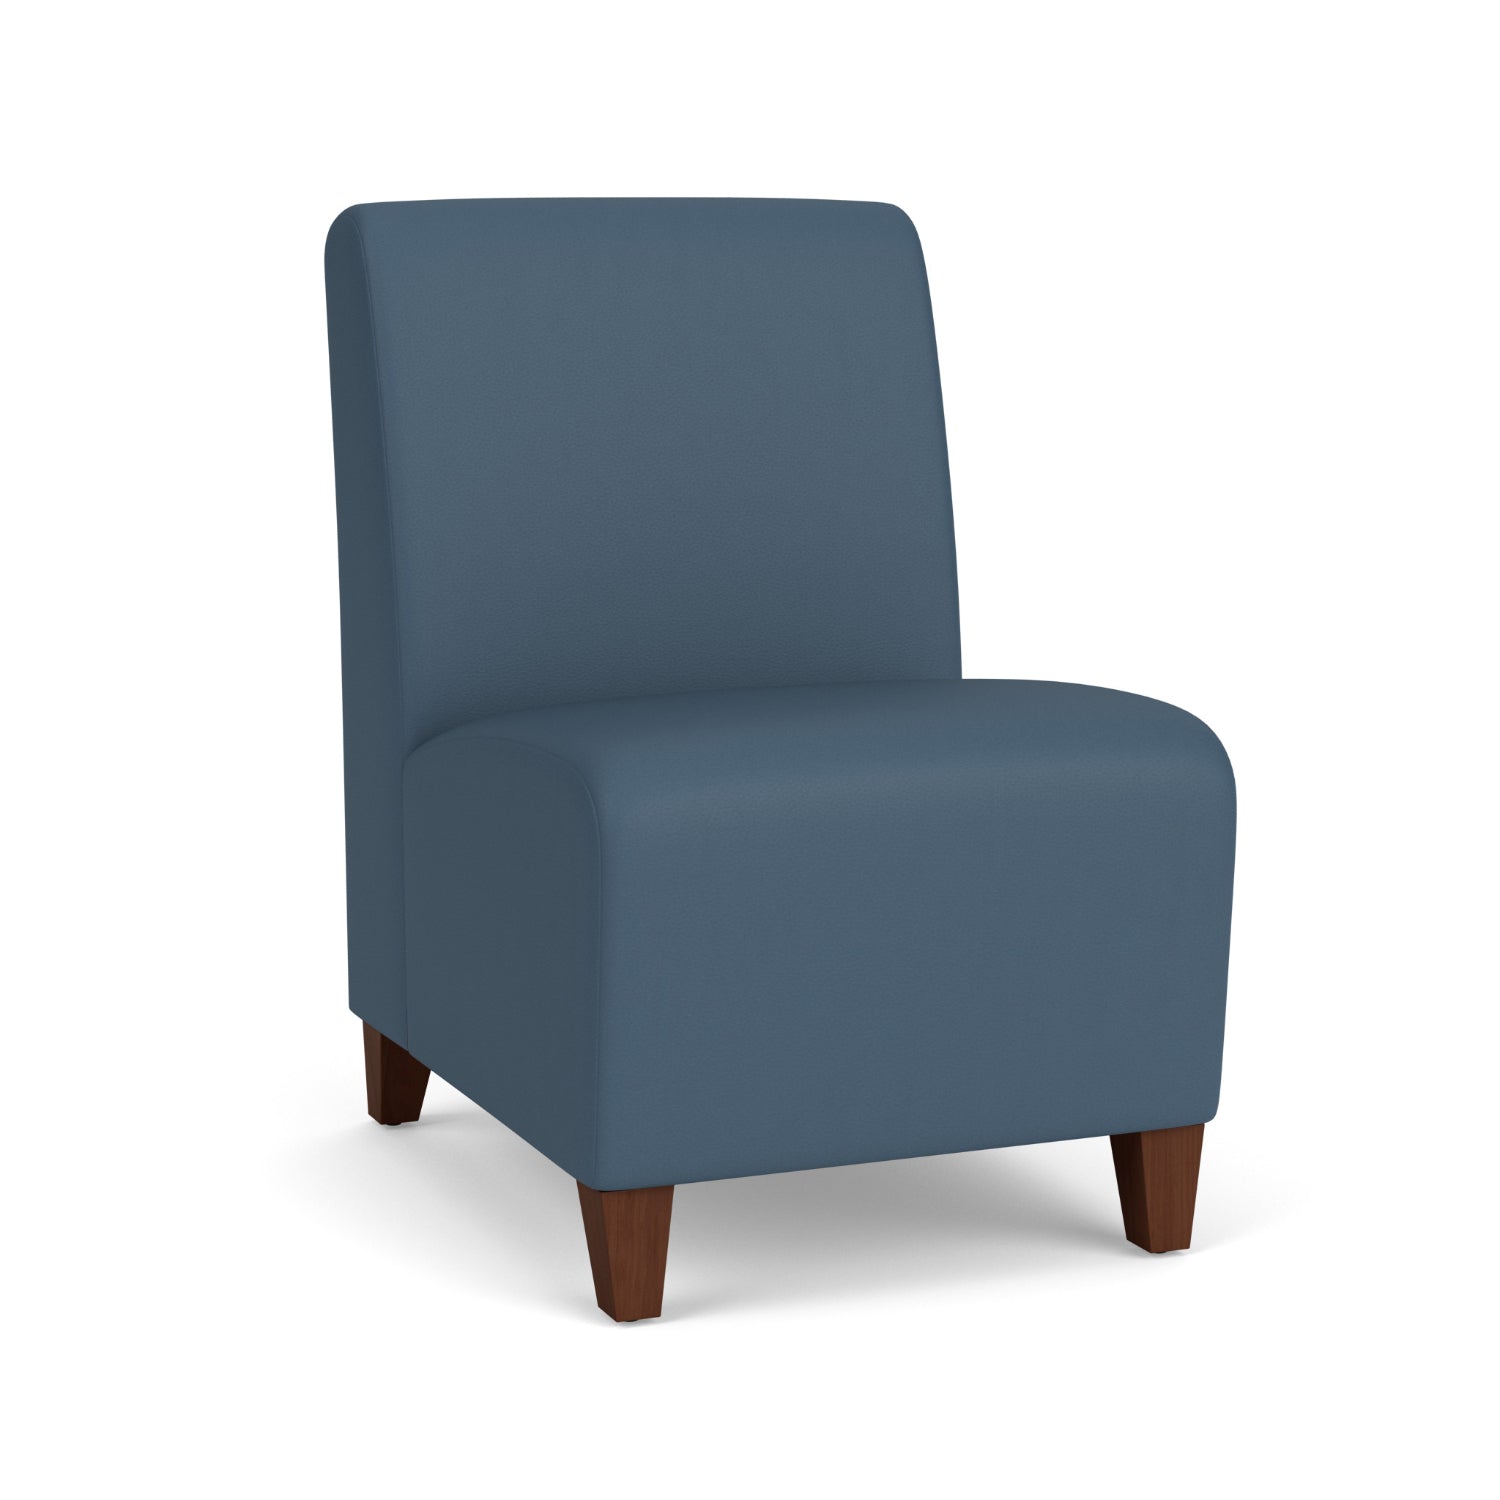 Siena Collection Reception Seating, Armless Guest Chair, Standard Vinyl Upholstery, FREE SHIPPING